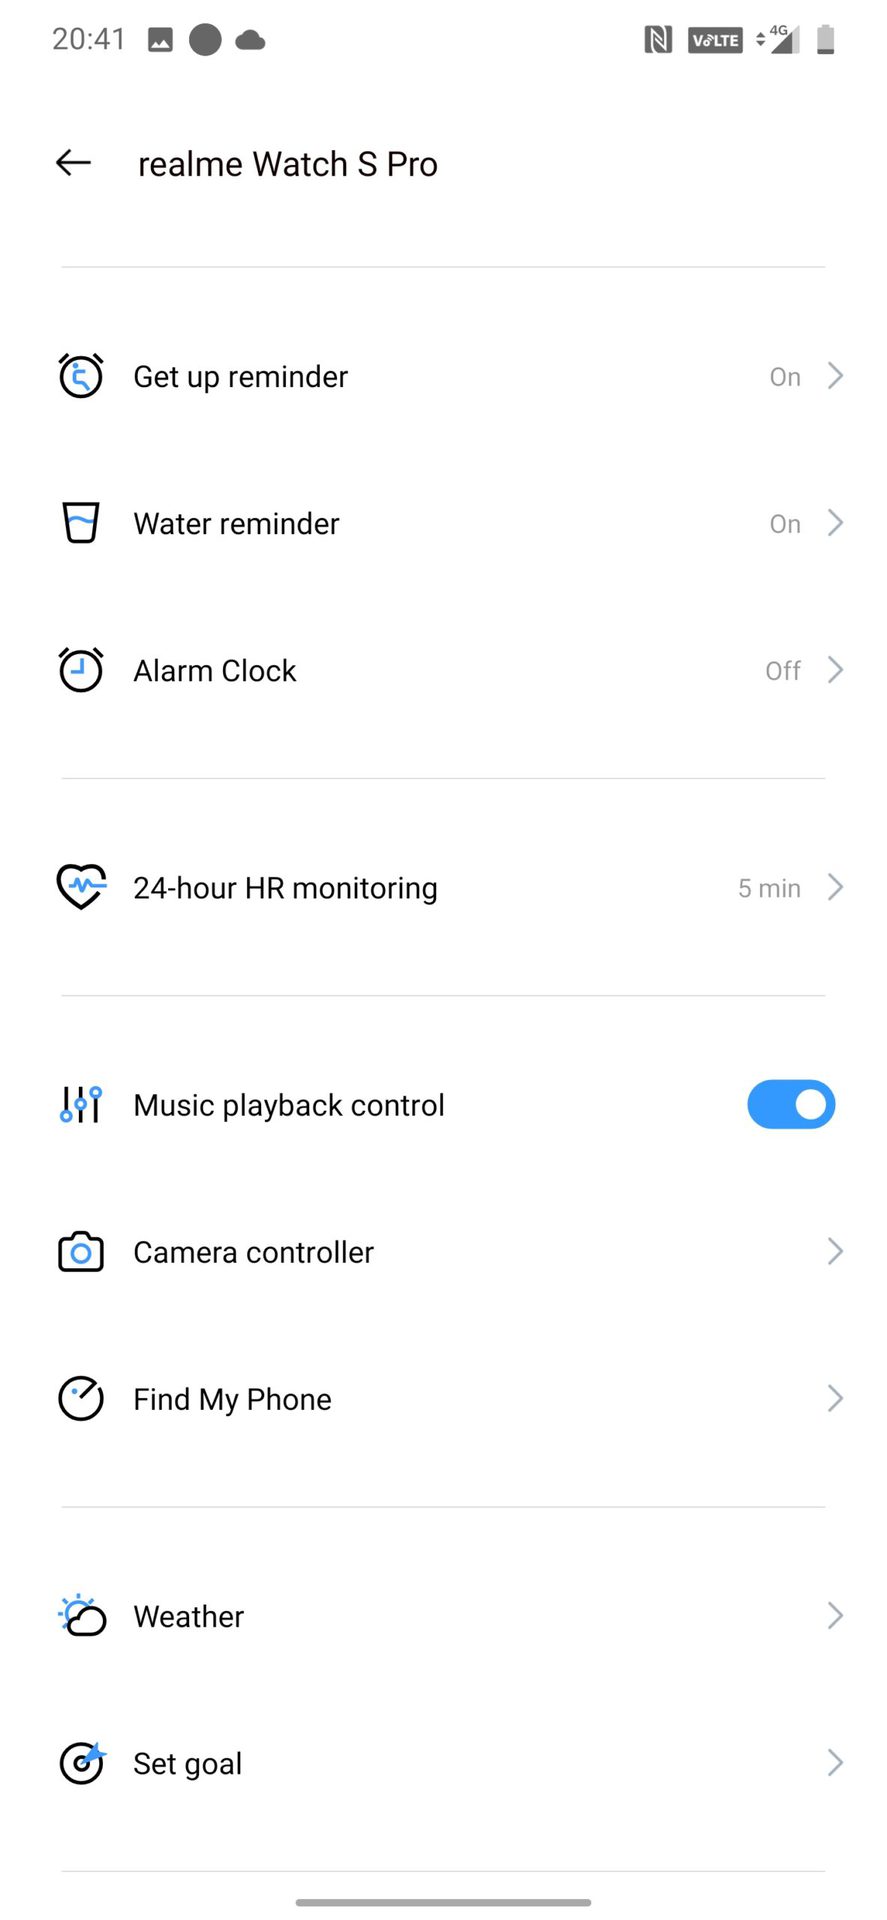 realme Watch S Pro reminders